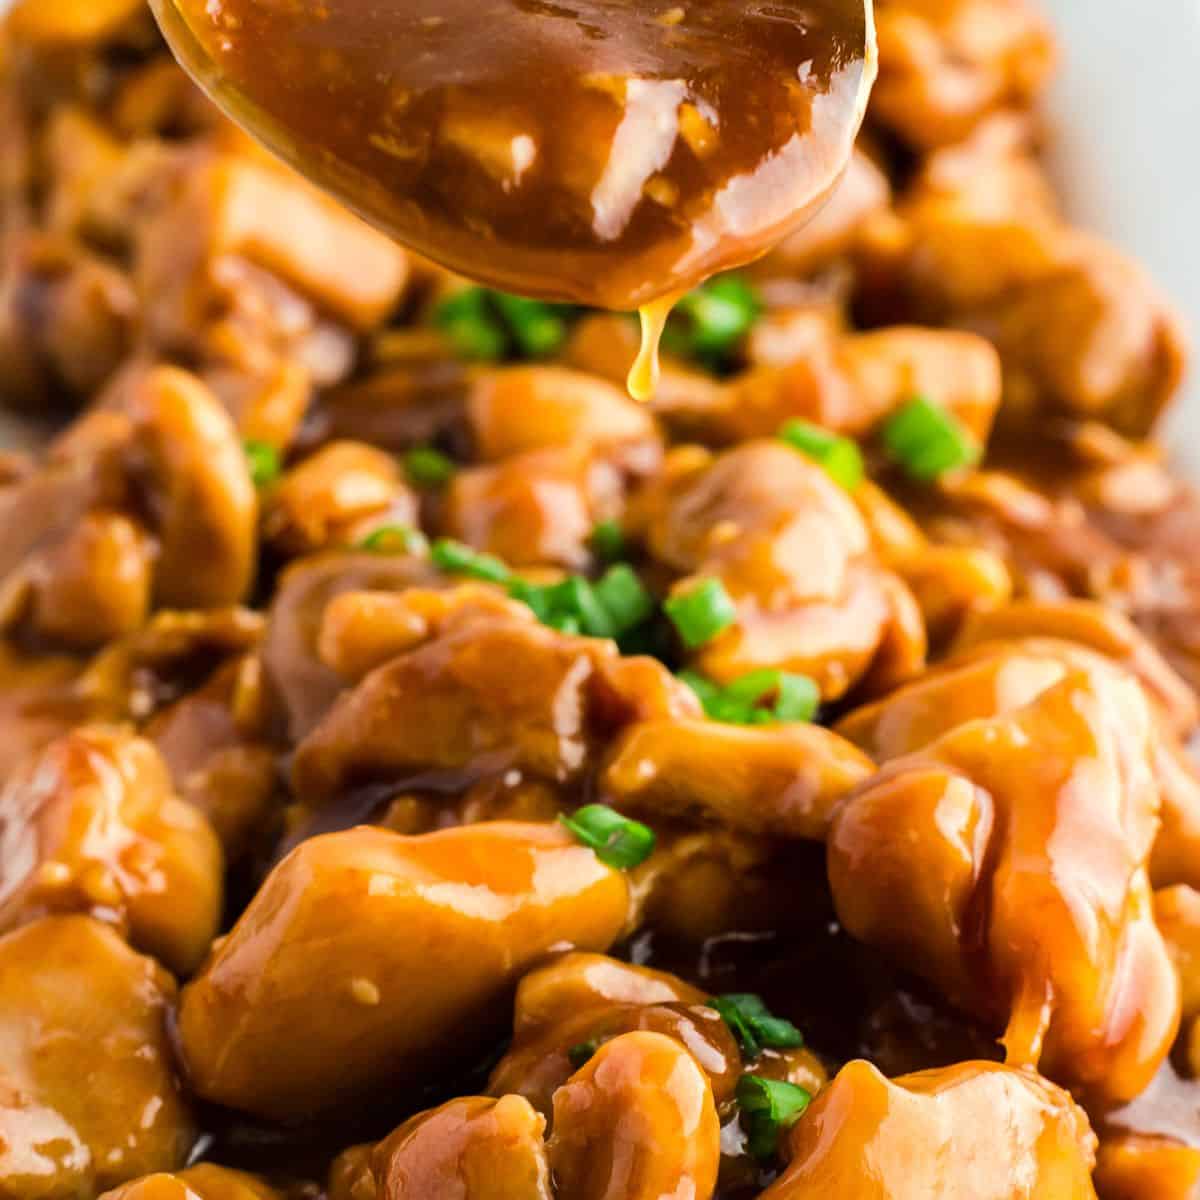 Tender pieces of chicken smothered in a homemade bourbon sauce and garnished with green onions.